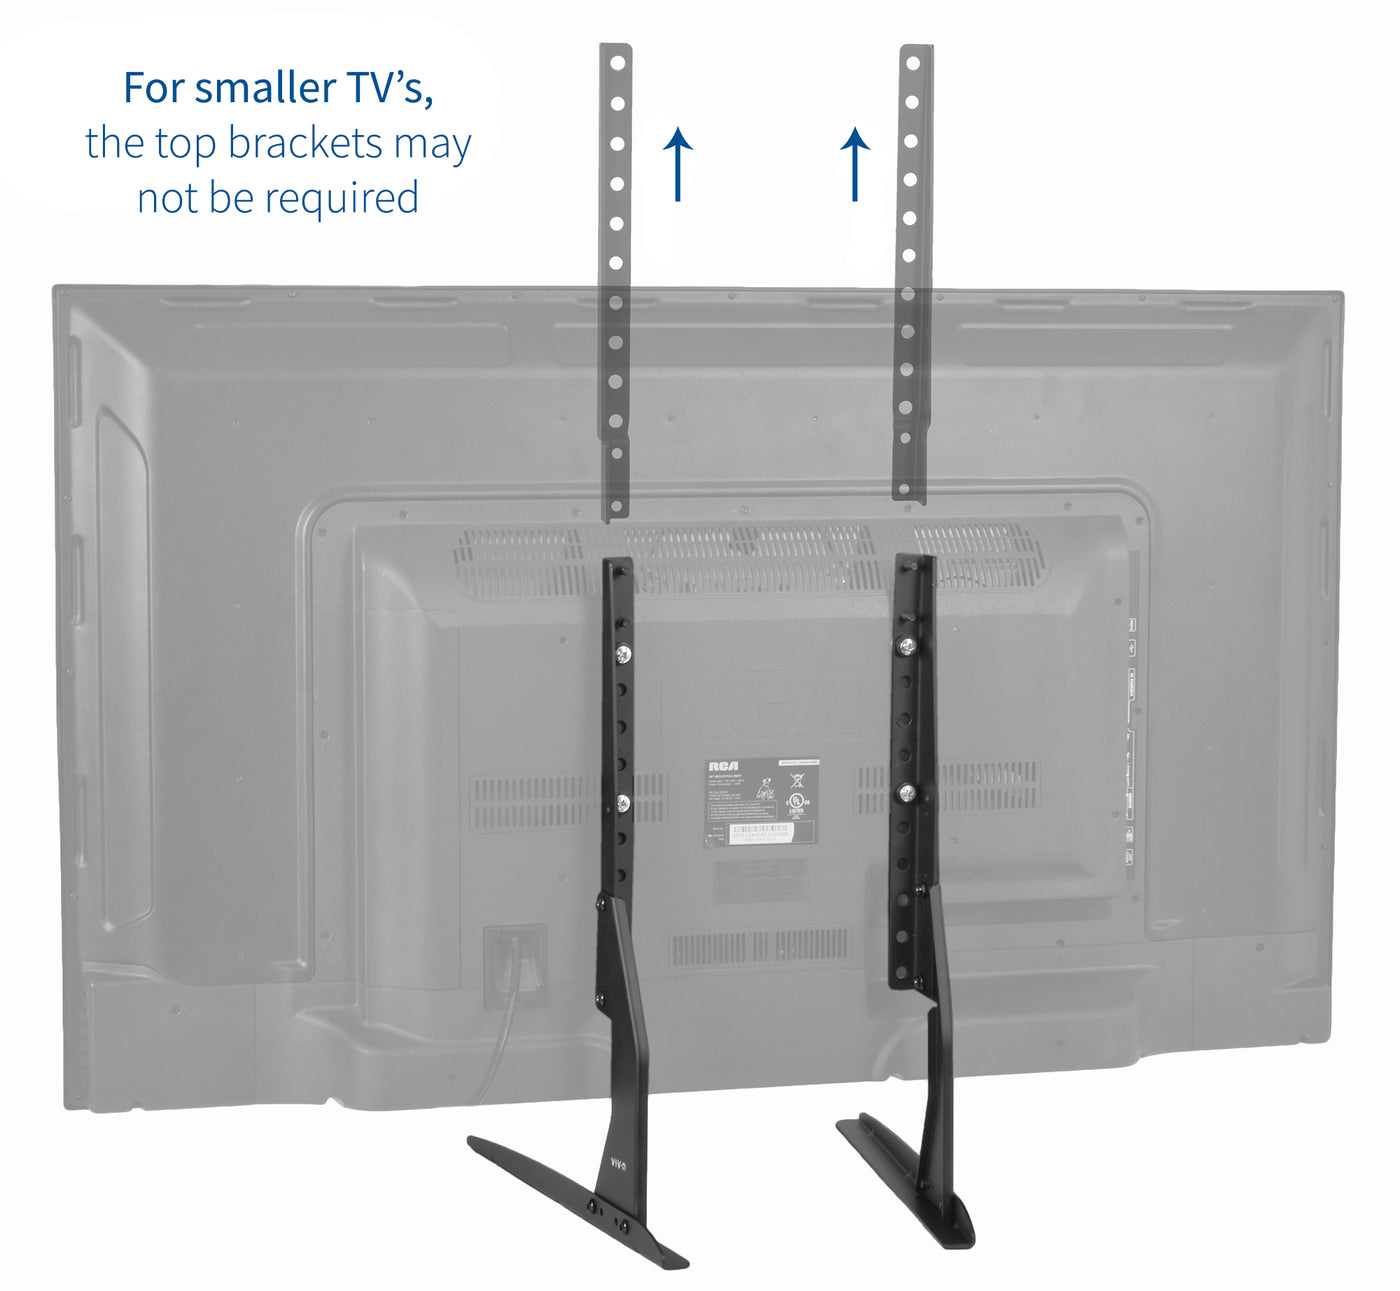 Heavy-duty tabletop TV stand.